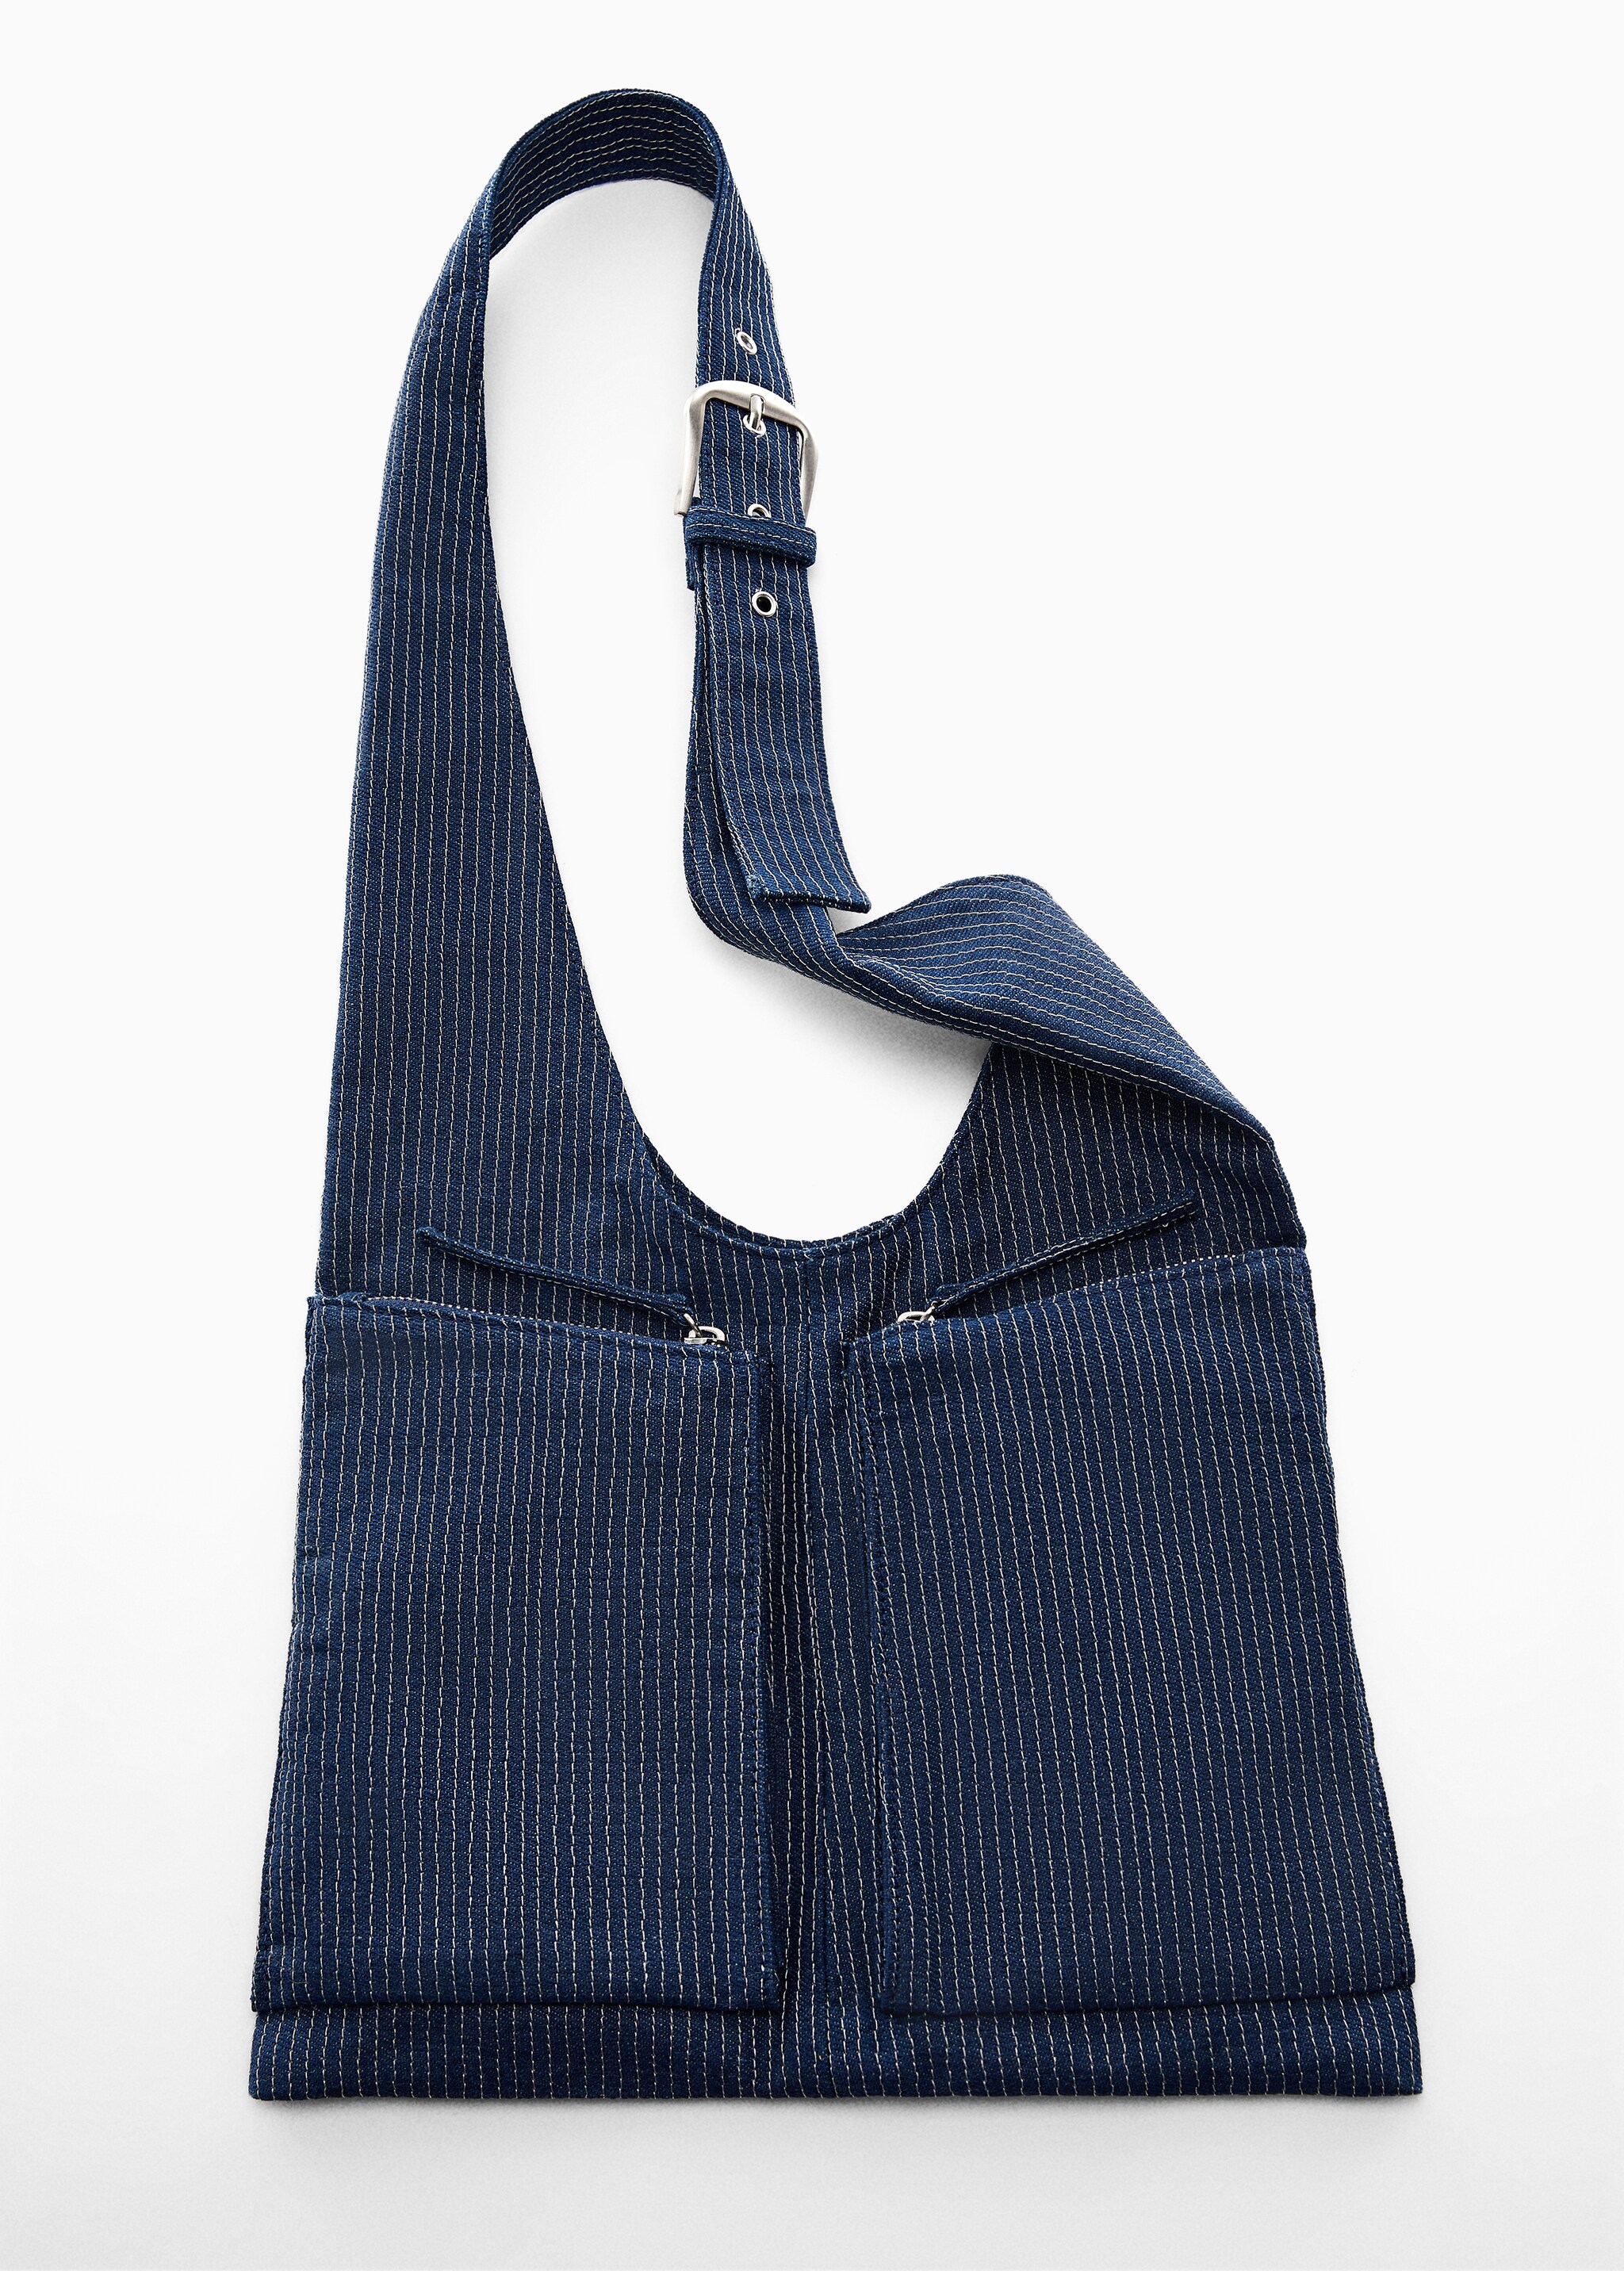 Denim bag with pockets - Details of the article 5